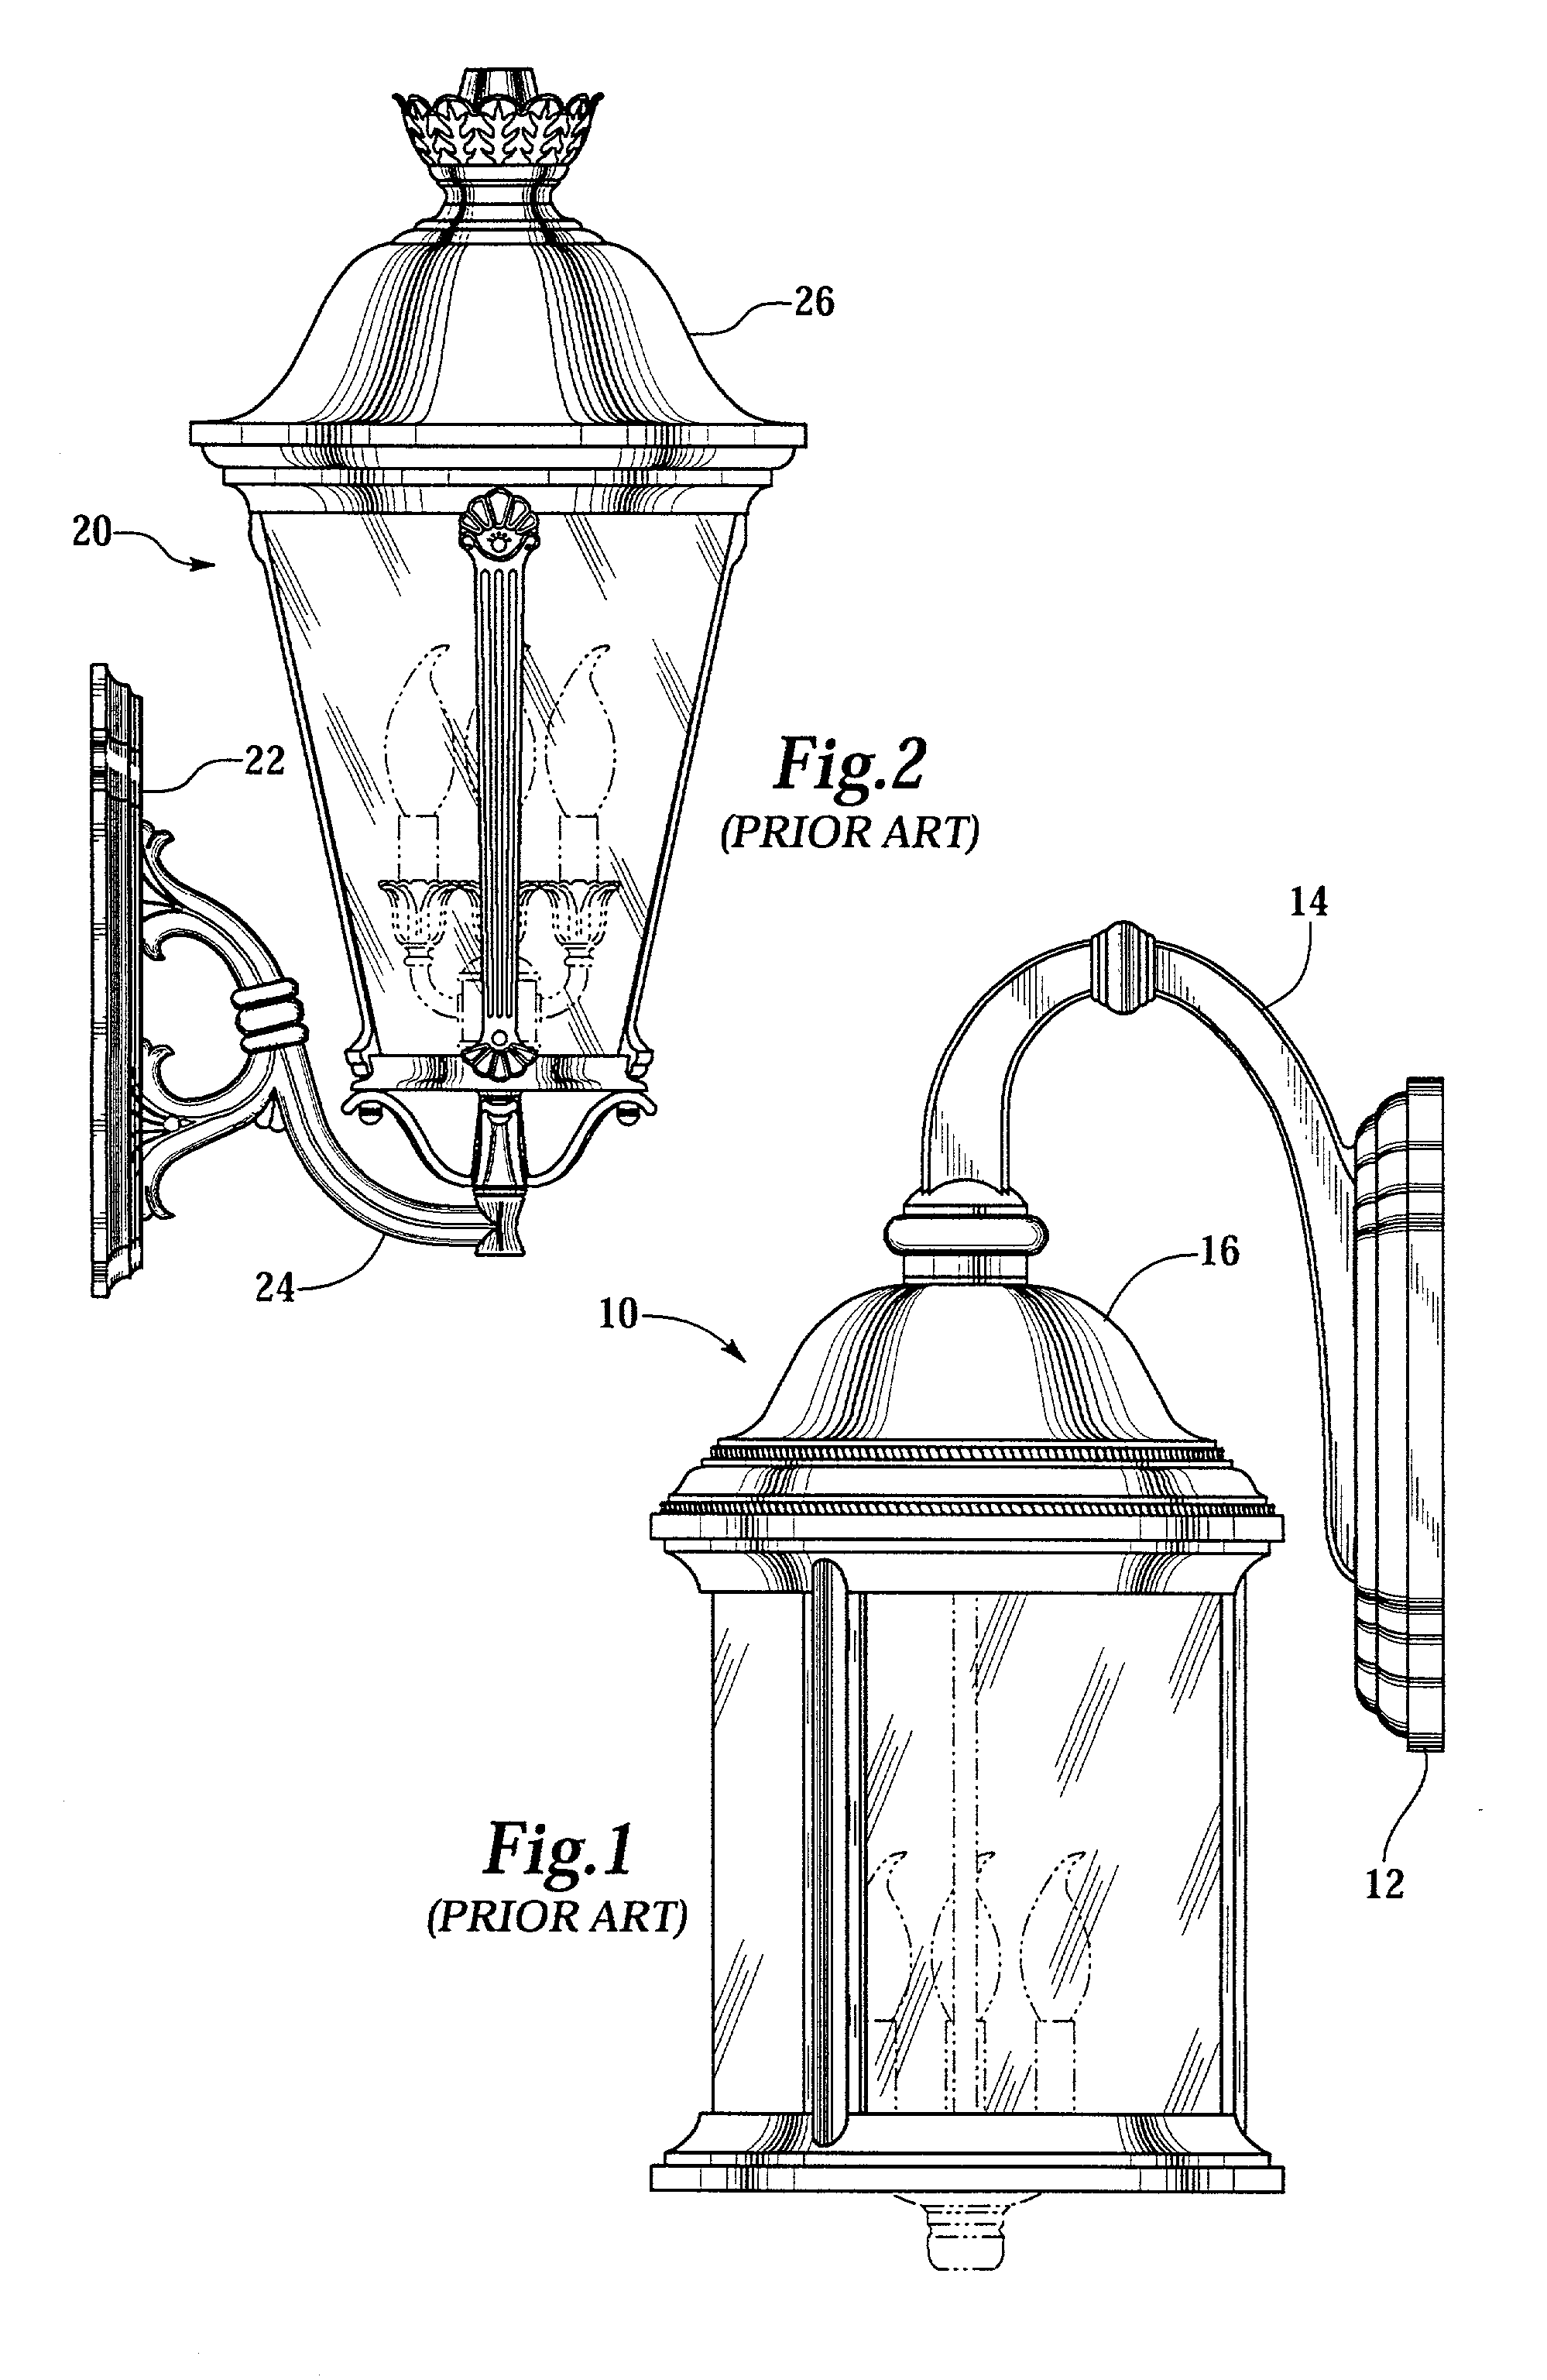 Lighting fixture with enclosed wiring